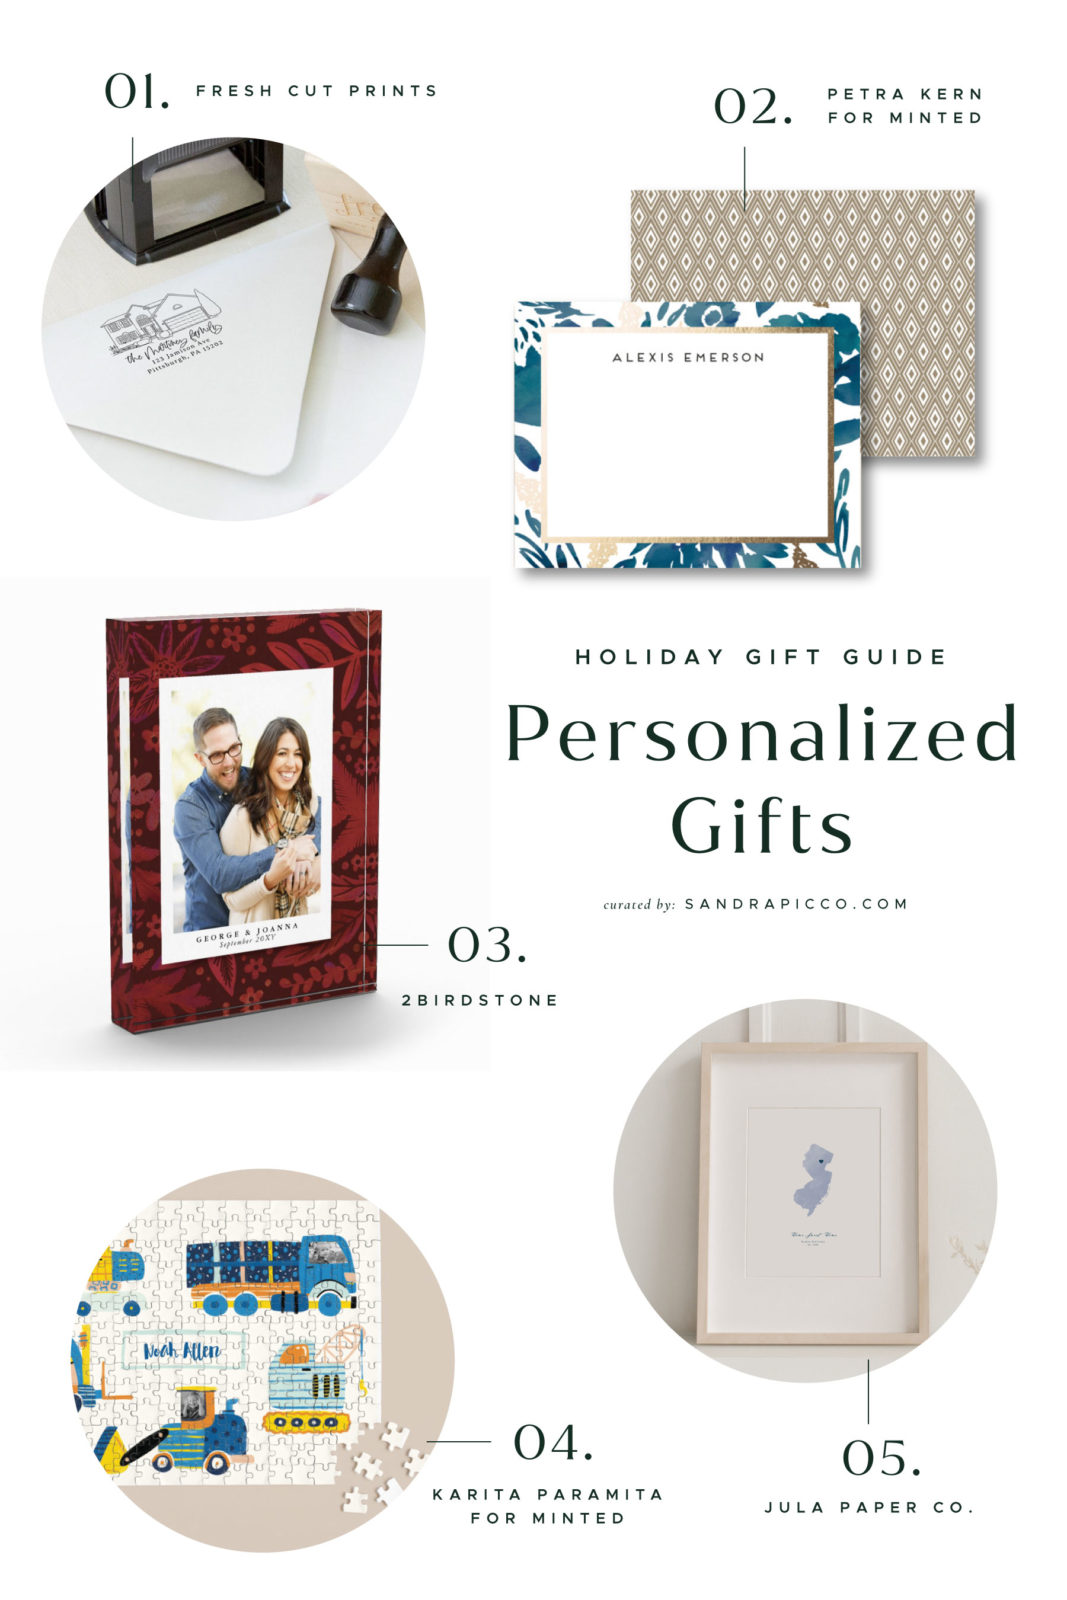 This is a holiday gift guide featuring personalized gifts